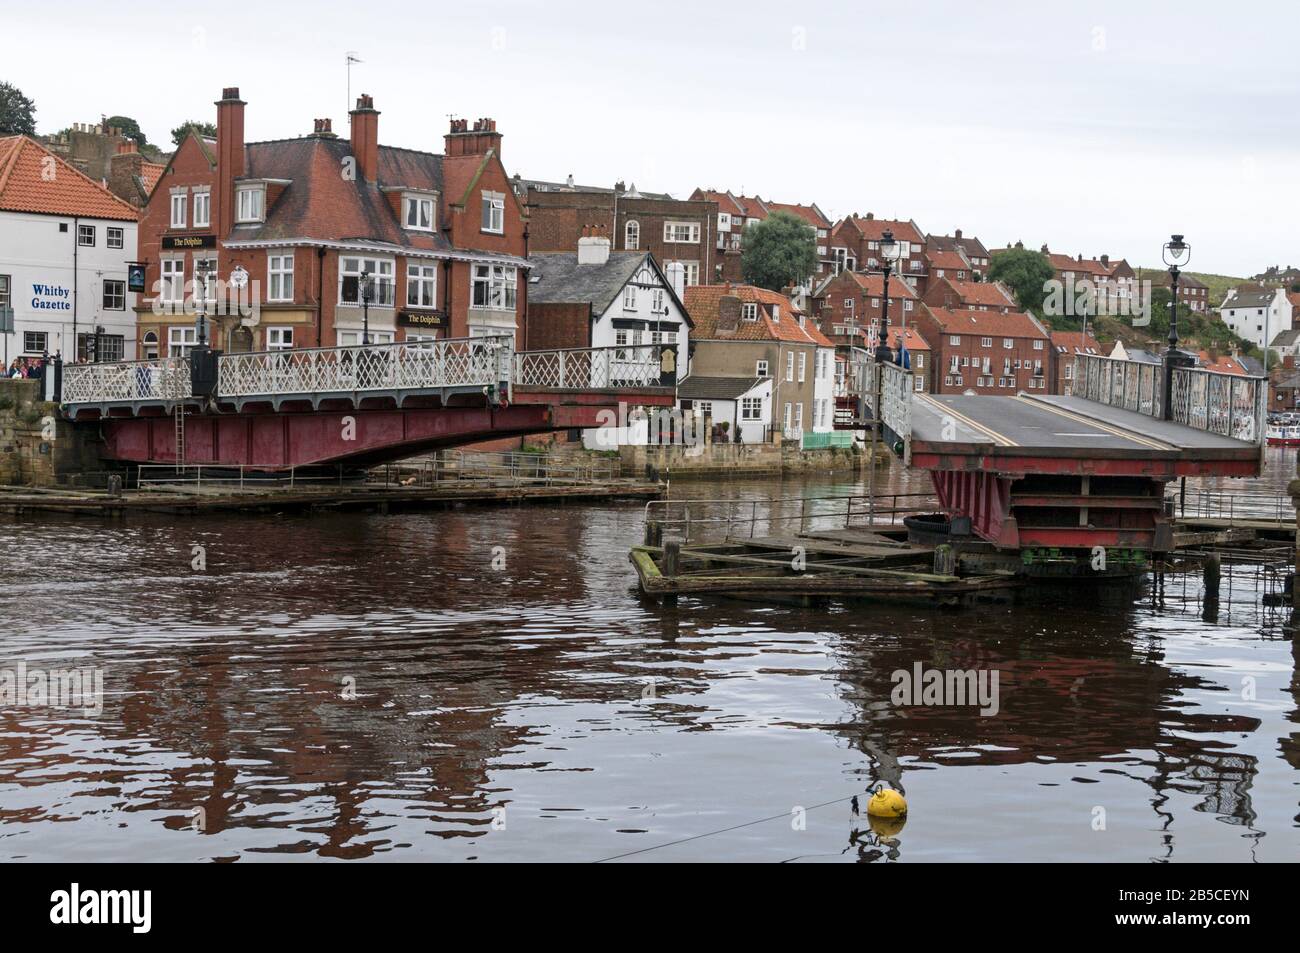 The swing bridge on the river Ask connecting the historical side of Whitby with the main shopping side of Whitby on the east coast in North Yorkshire, Stock Photo